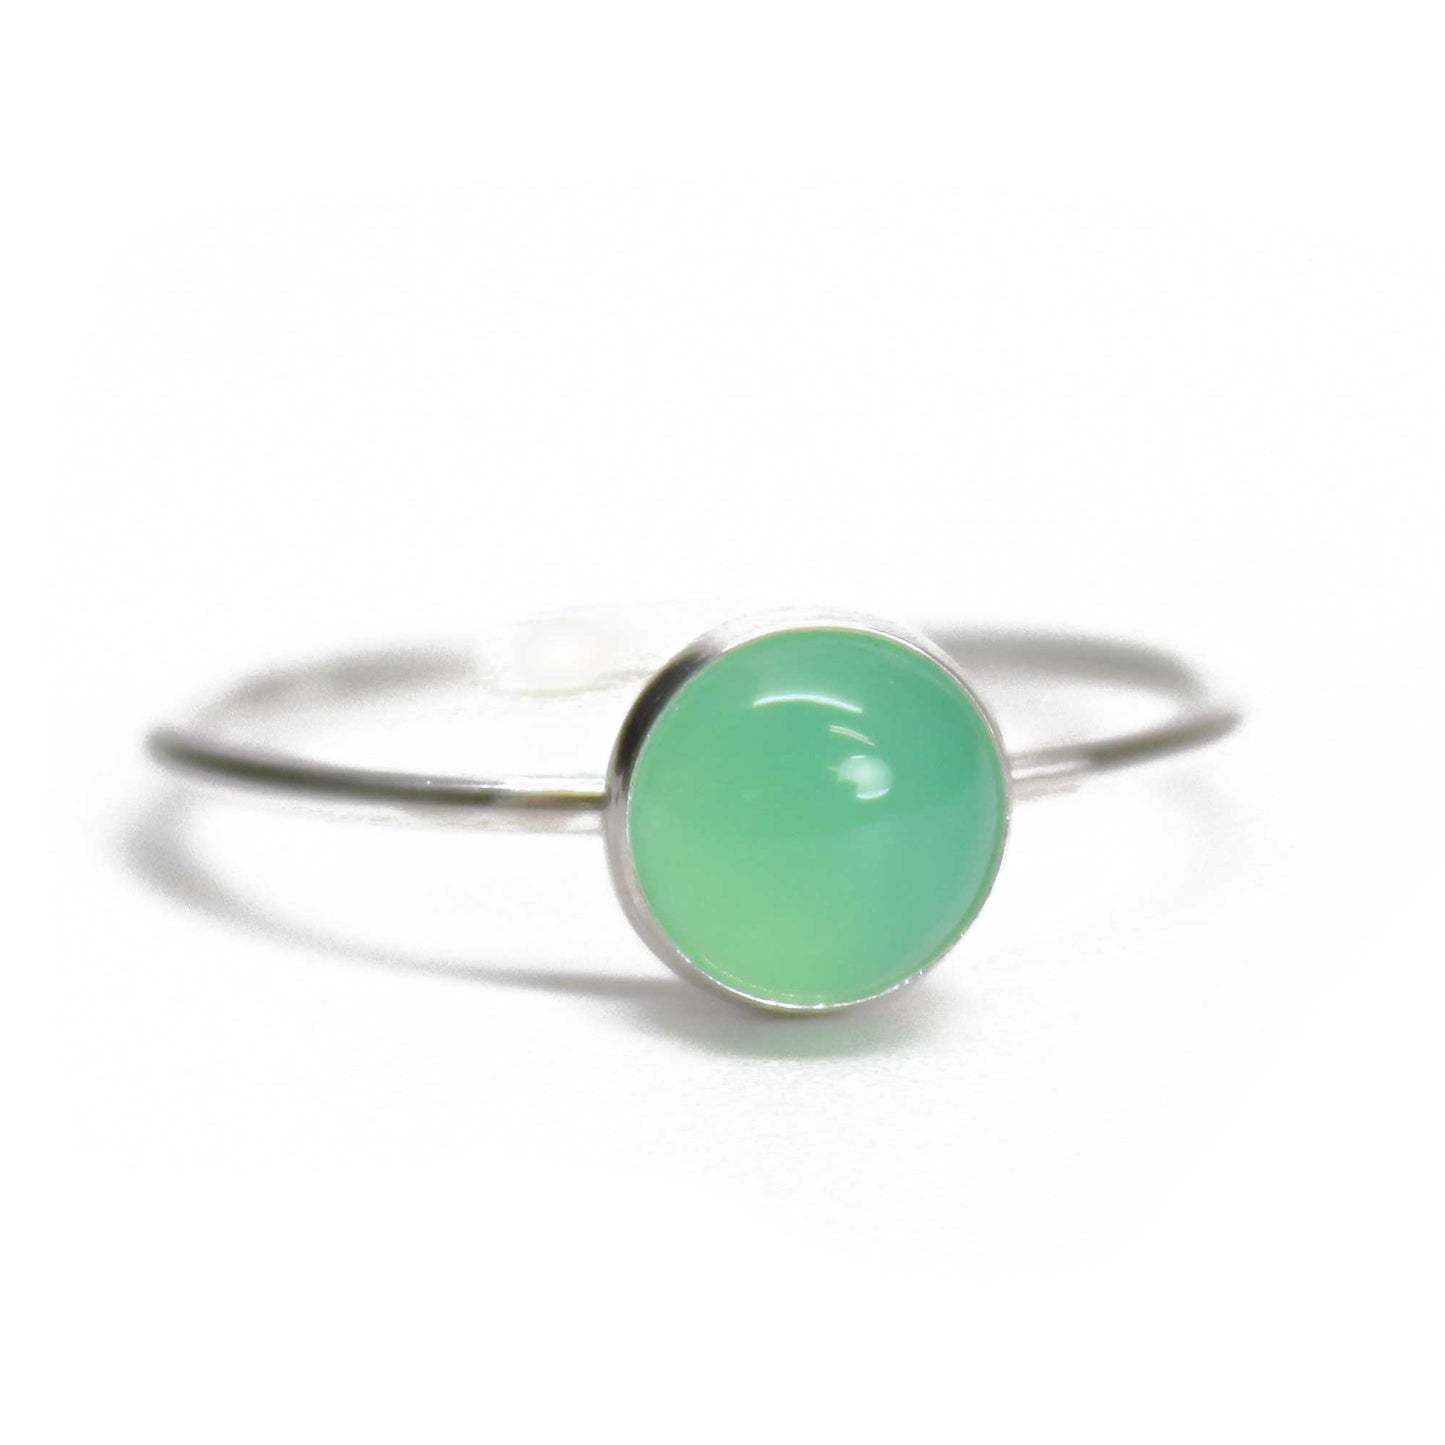 Dainty 6mm Round Green Chrysoprase Ring 925 Sterling Silver, Size 7 US